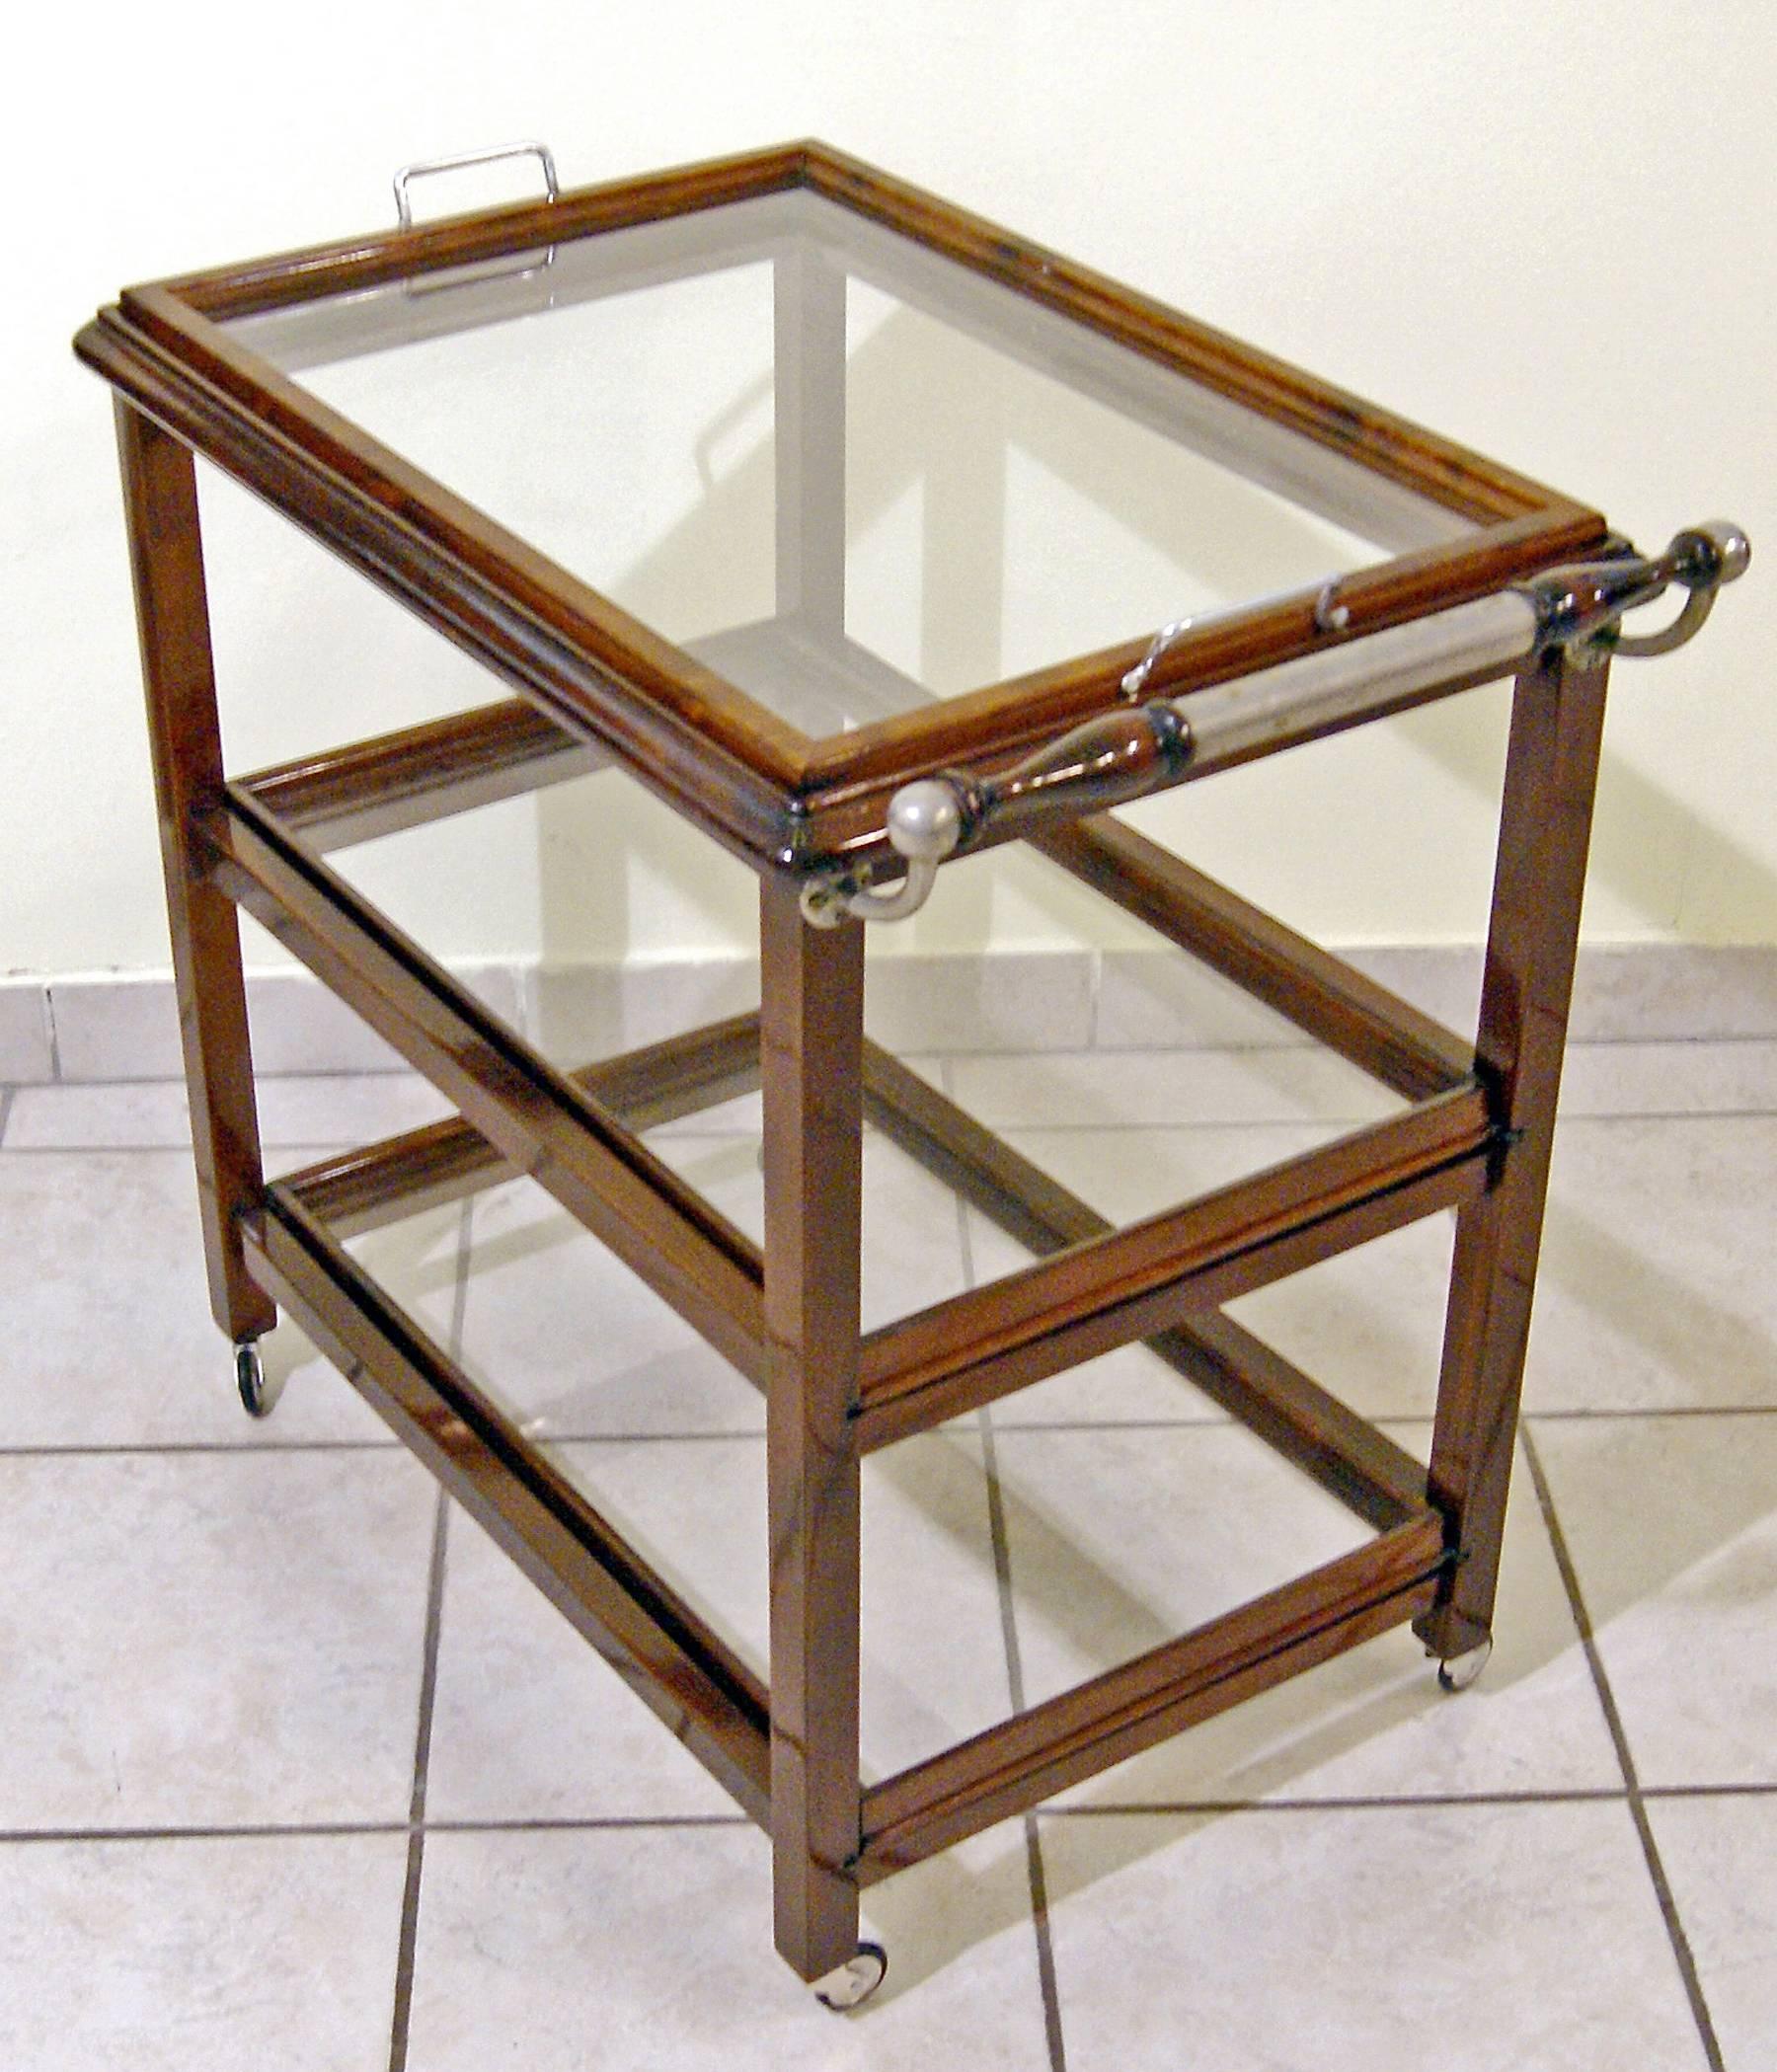 Art Nouveau serving trolley,
Vienna, made circa 1915.
 
Serving trolley of most elegant appearance
(Vintage / Art Nouveau)
nutwood / refurbished by hand.
The serving trolley's shelves are made of glass / the serving trolley stands on original